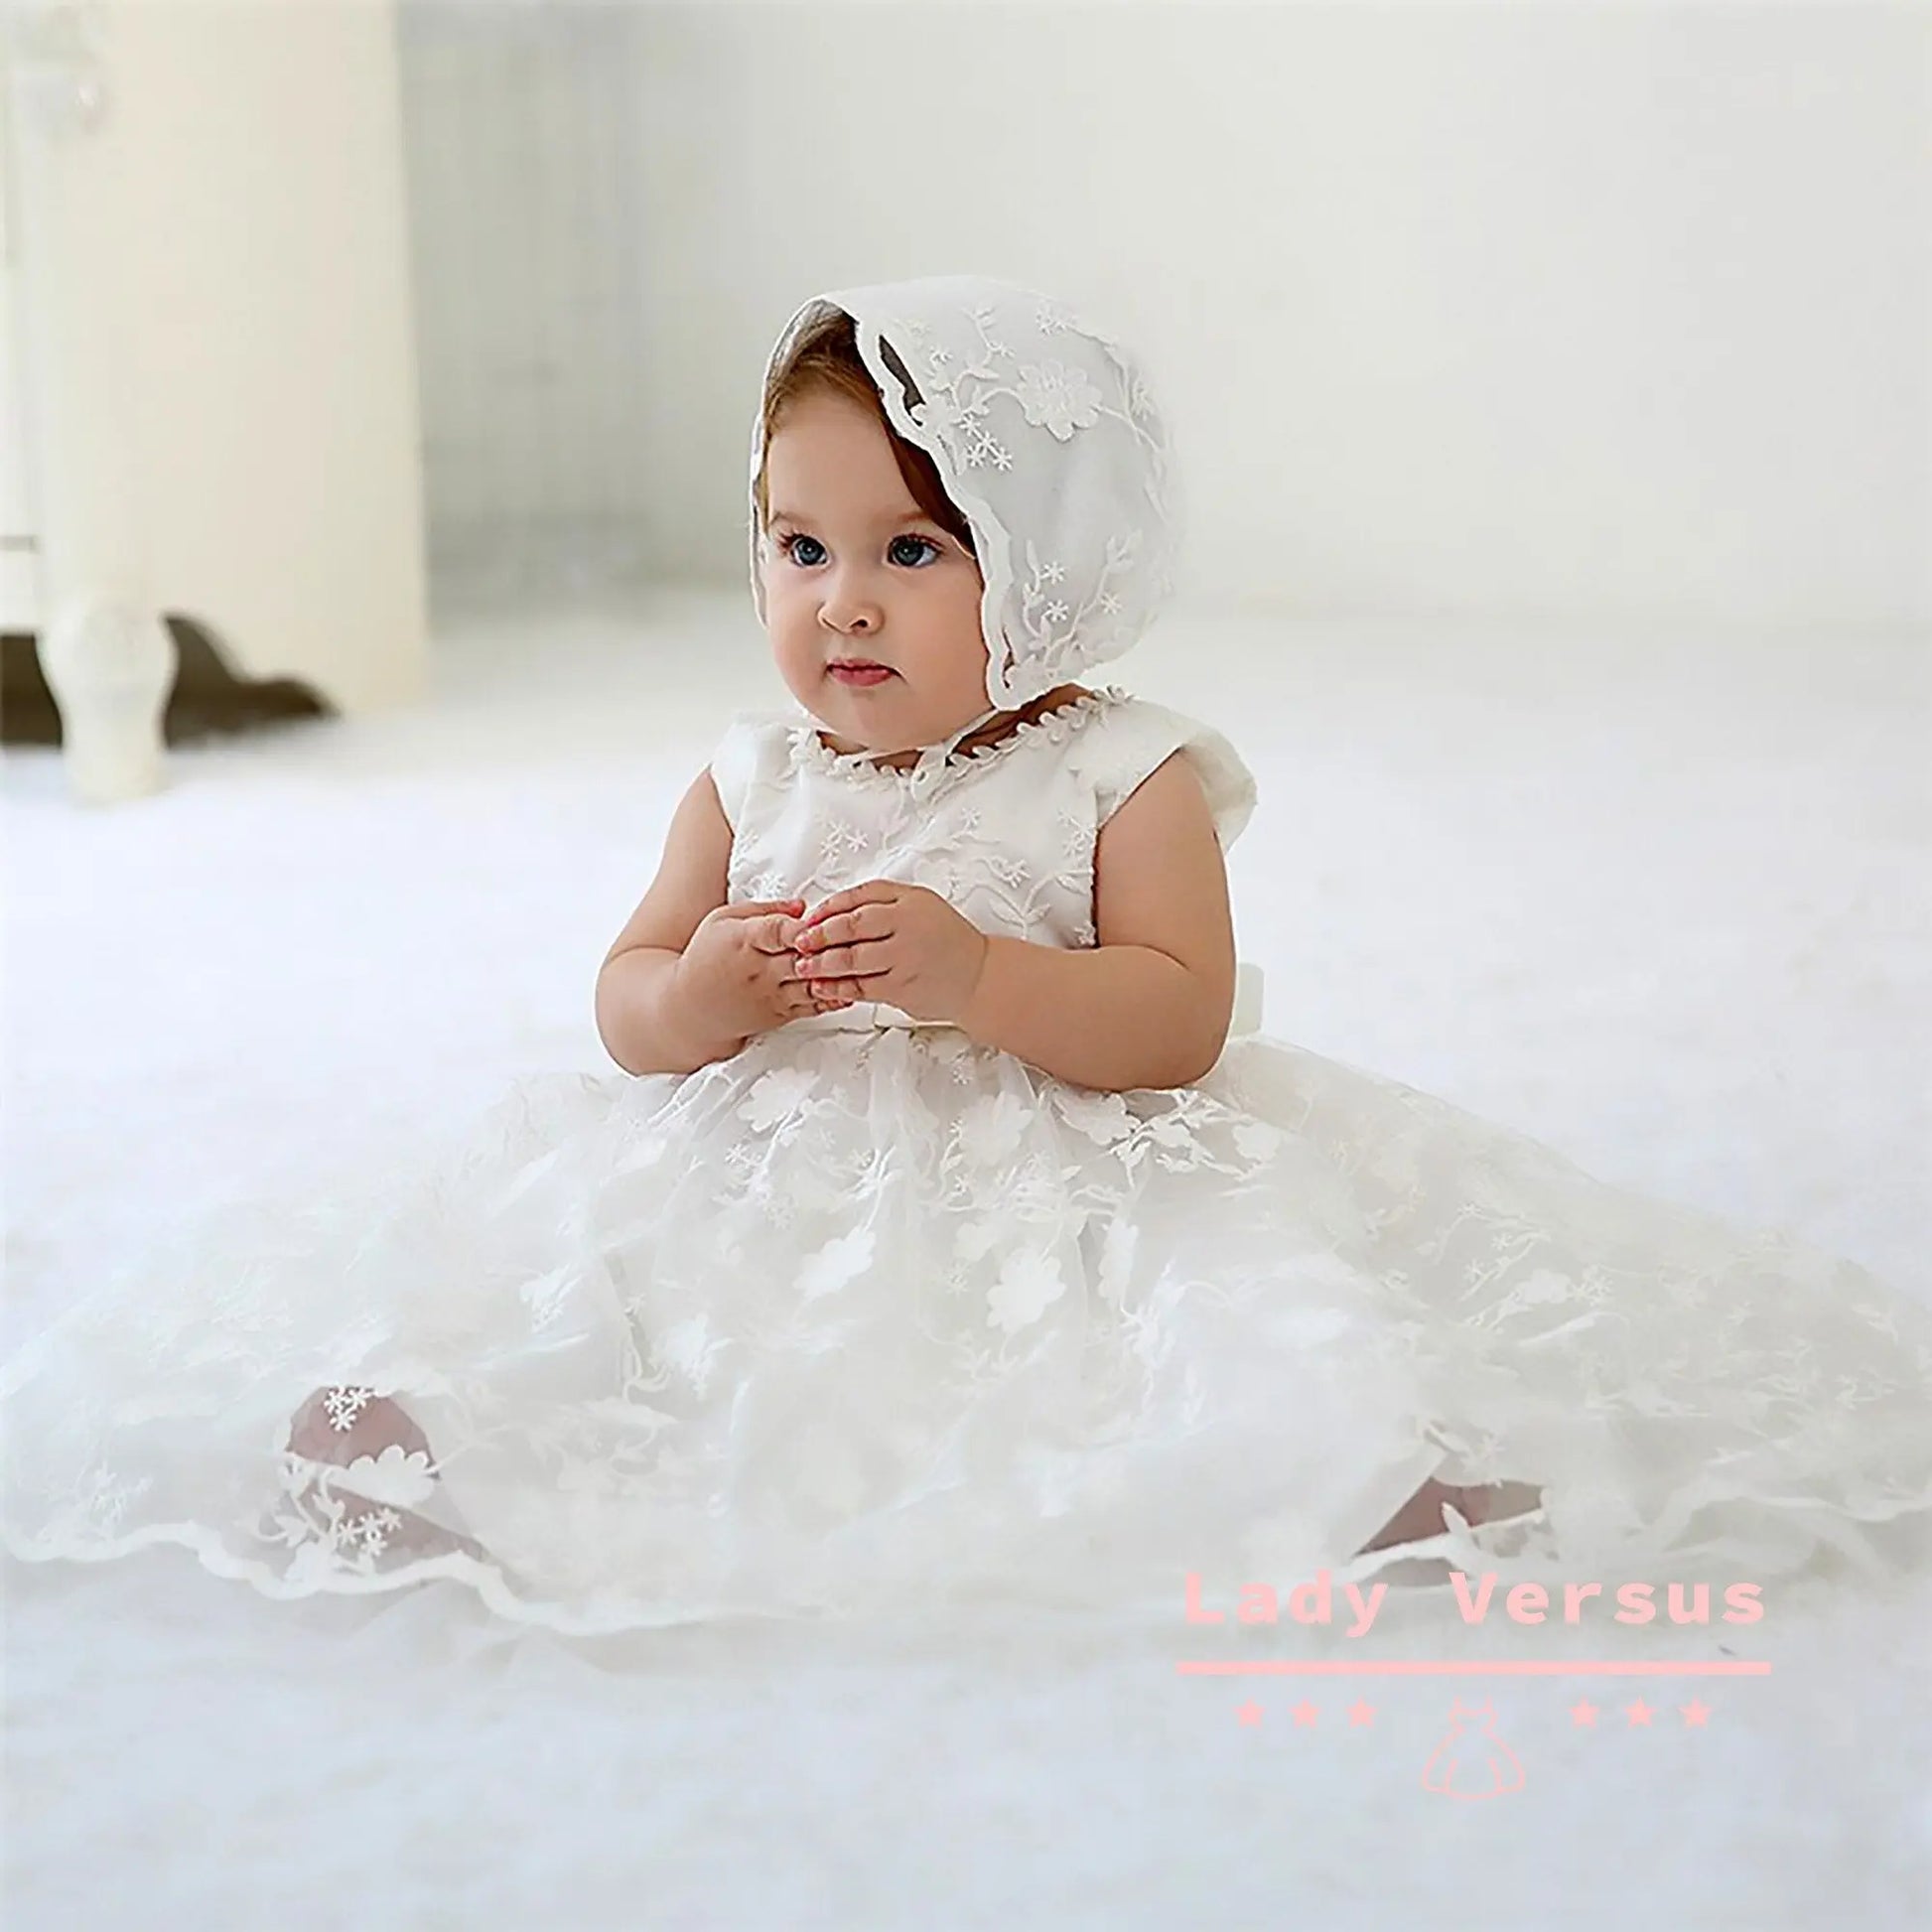 White Baby Girl Baptism Dress and bonnet  / Newborn Baby Girl Christening Gown/ Baby Girl Baptism Outfit/ birthday princess gown Lady Versus